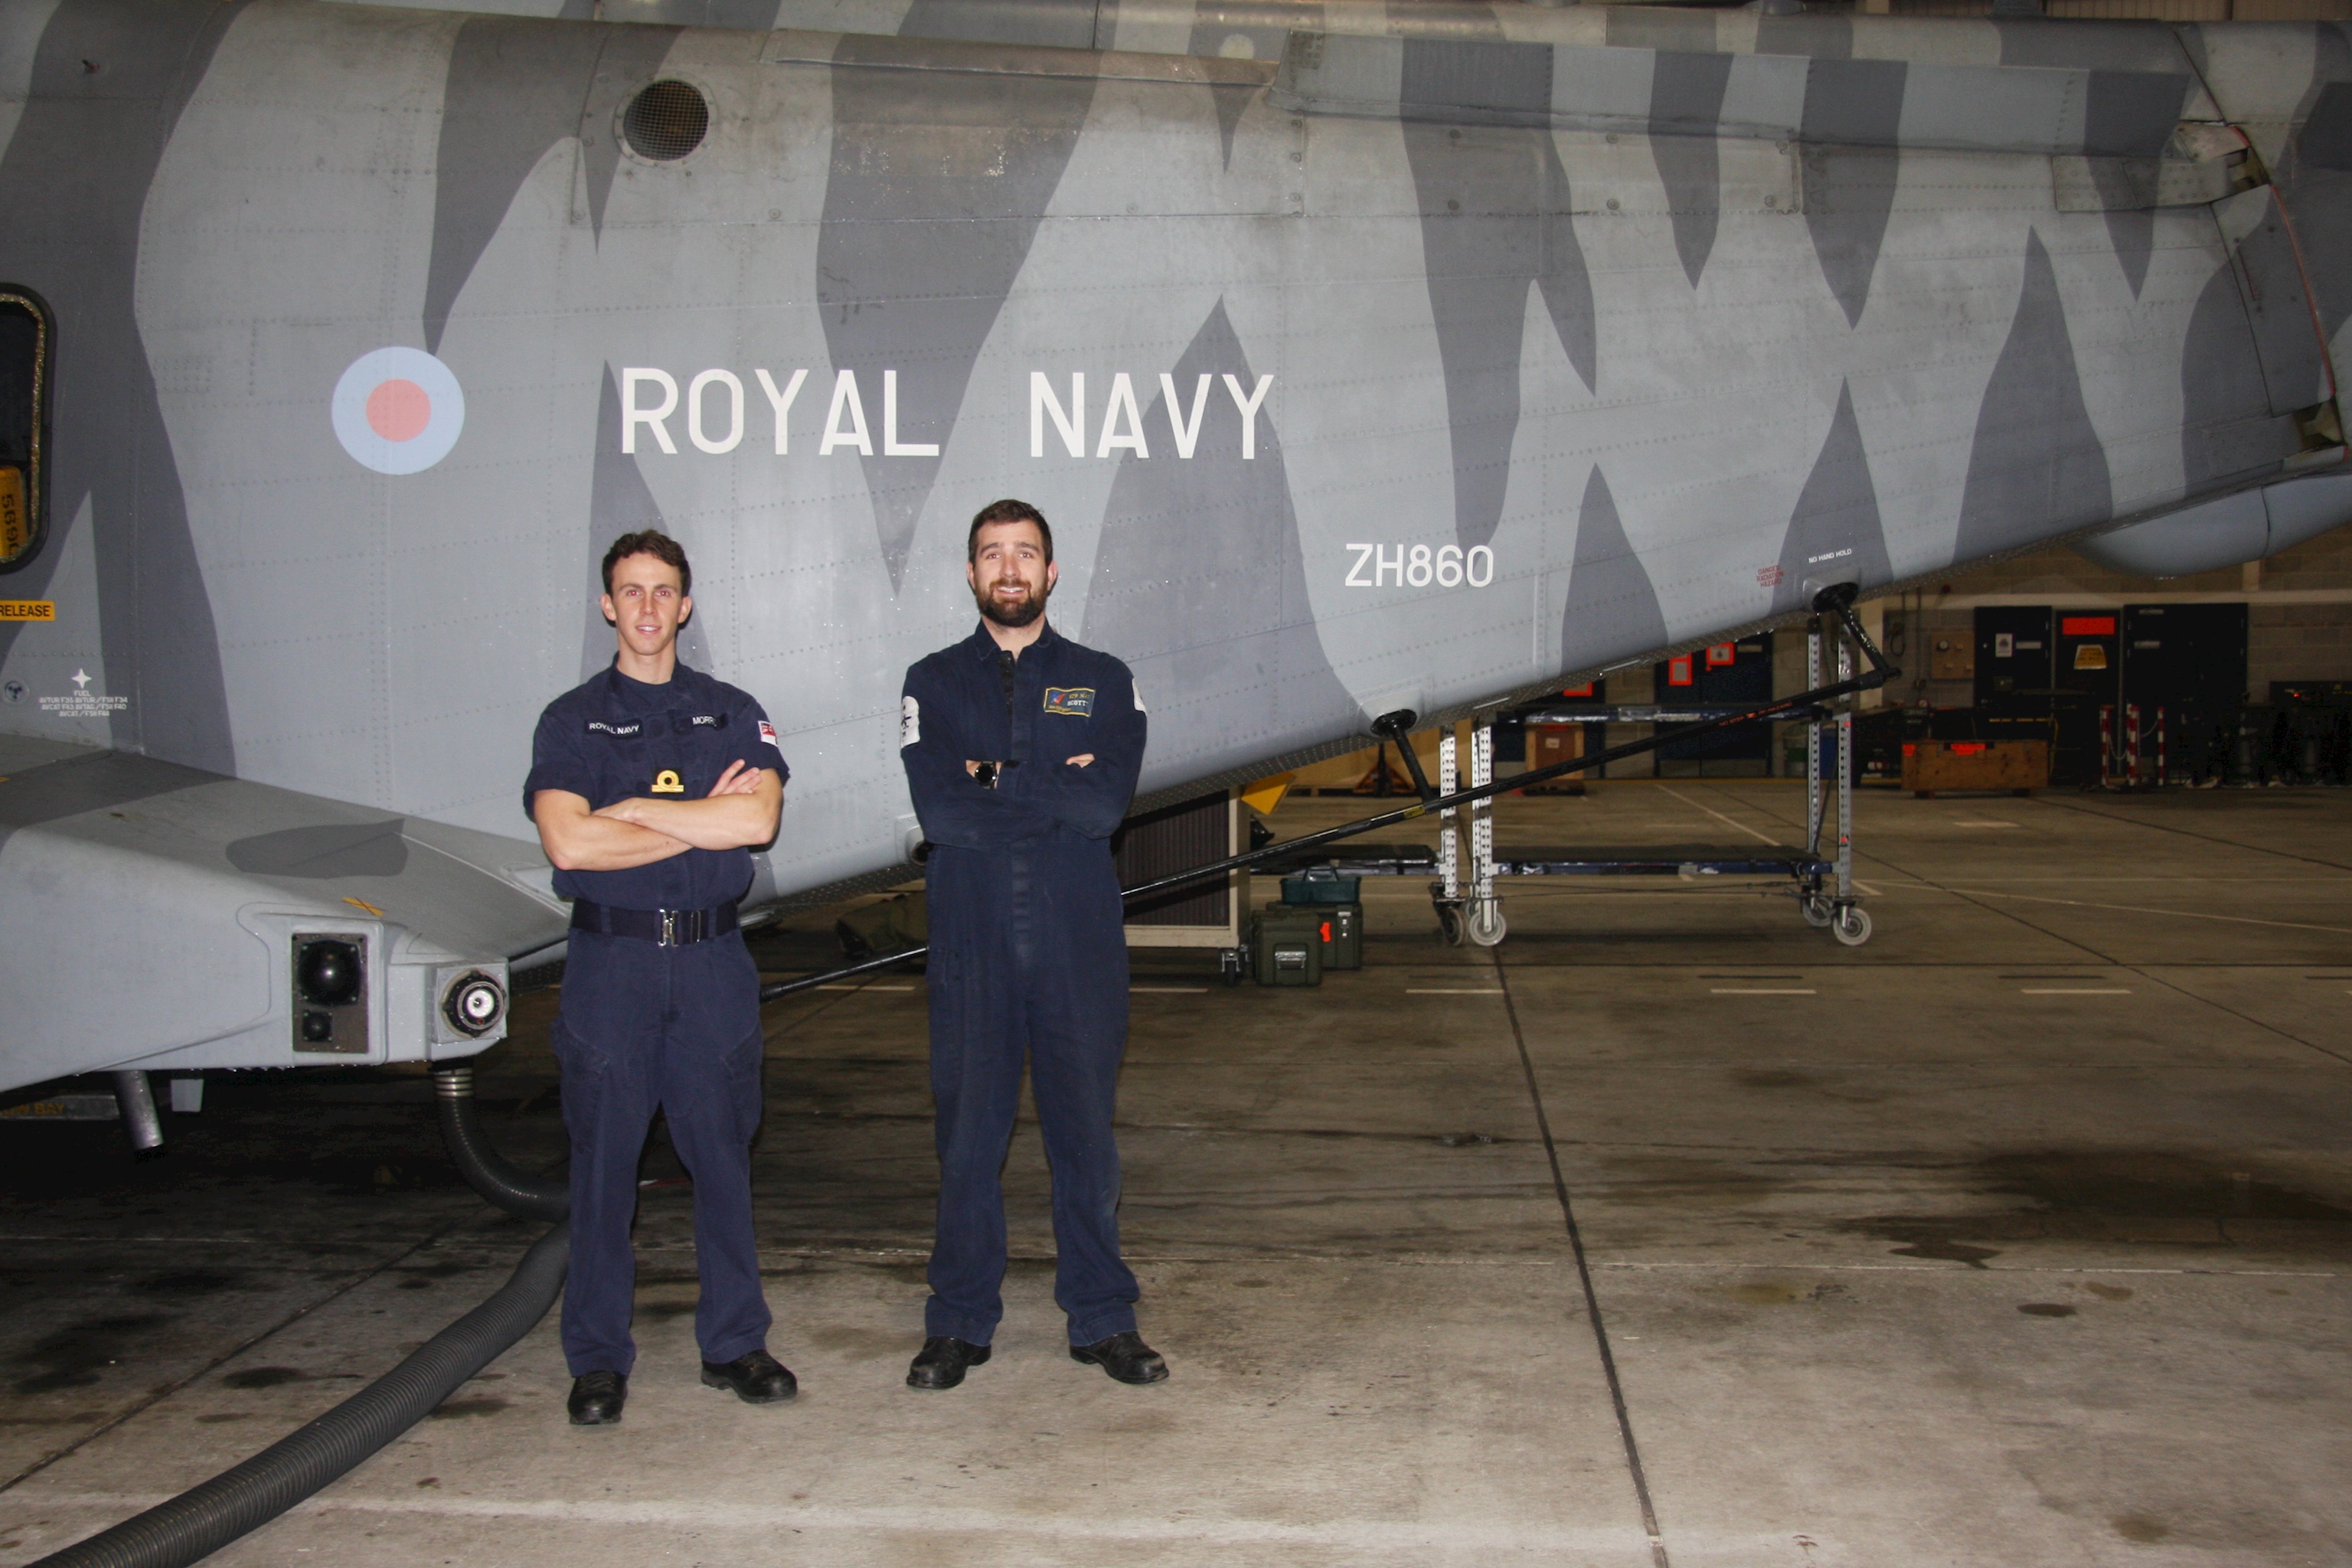 OMs Working Together: The Royal Navy